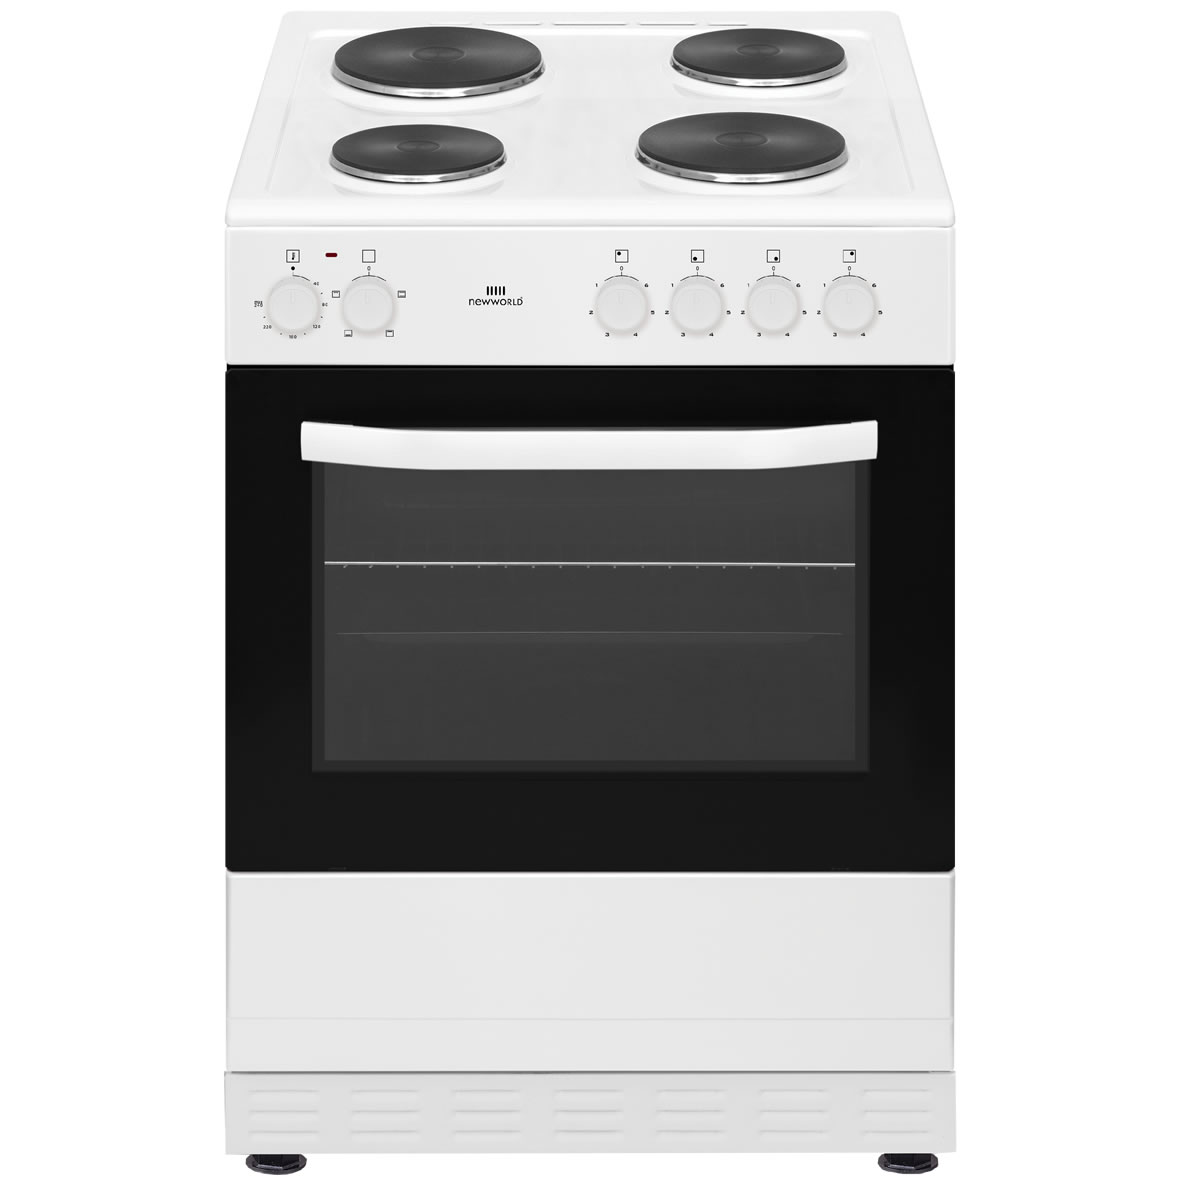 New-World 600mm Single Electric Cooker Solid Plate Hob White